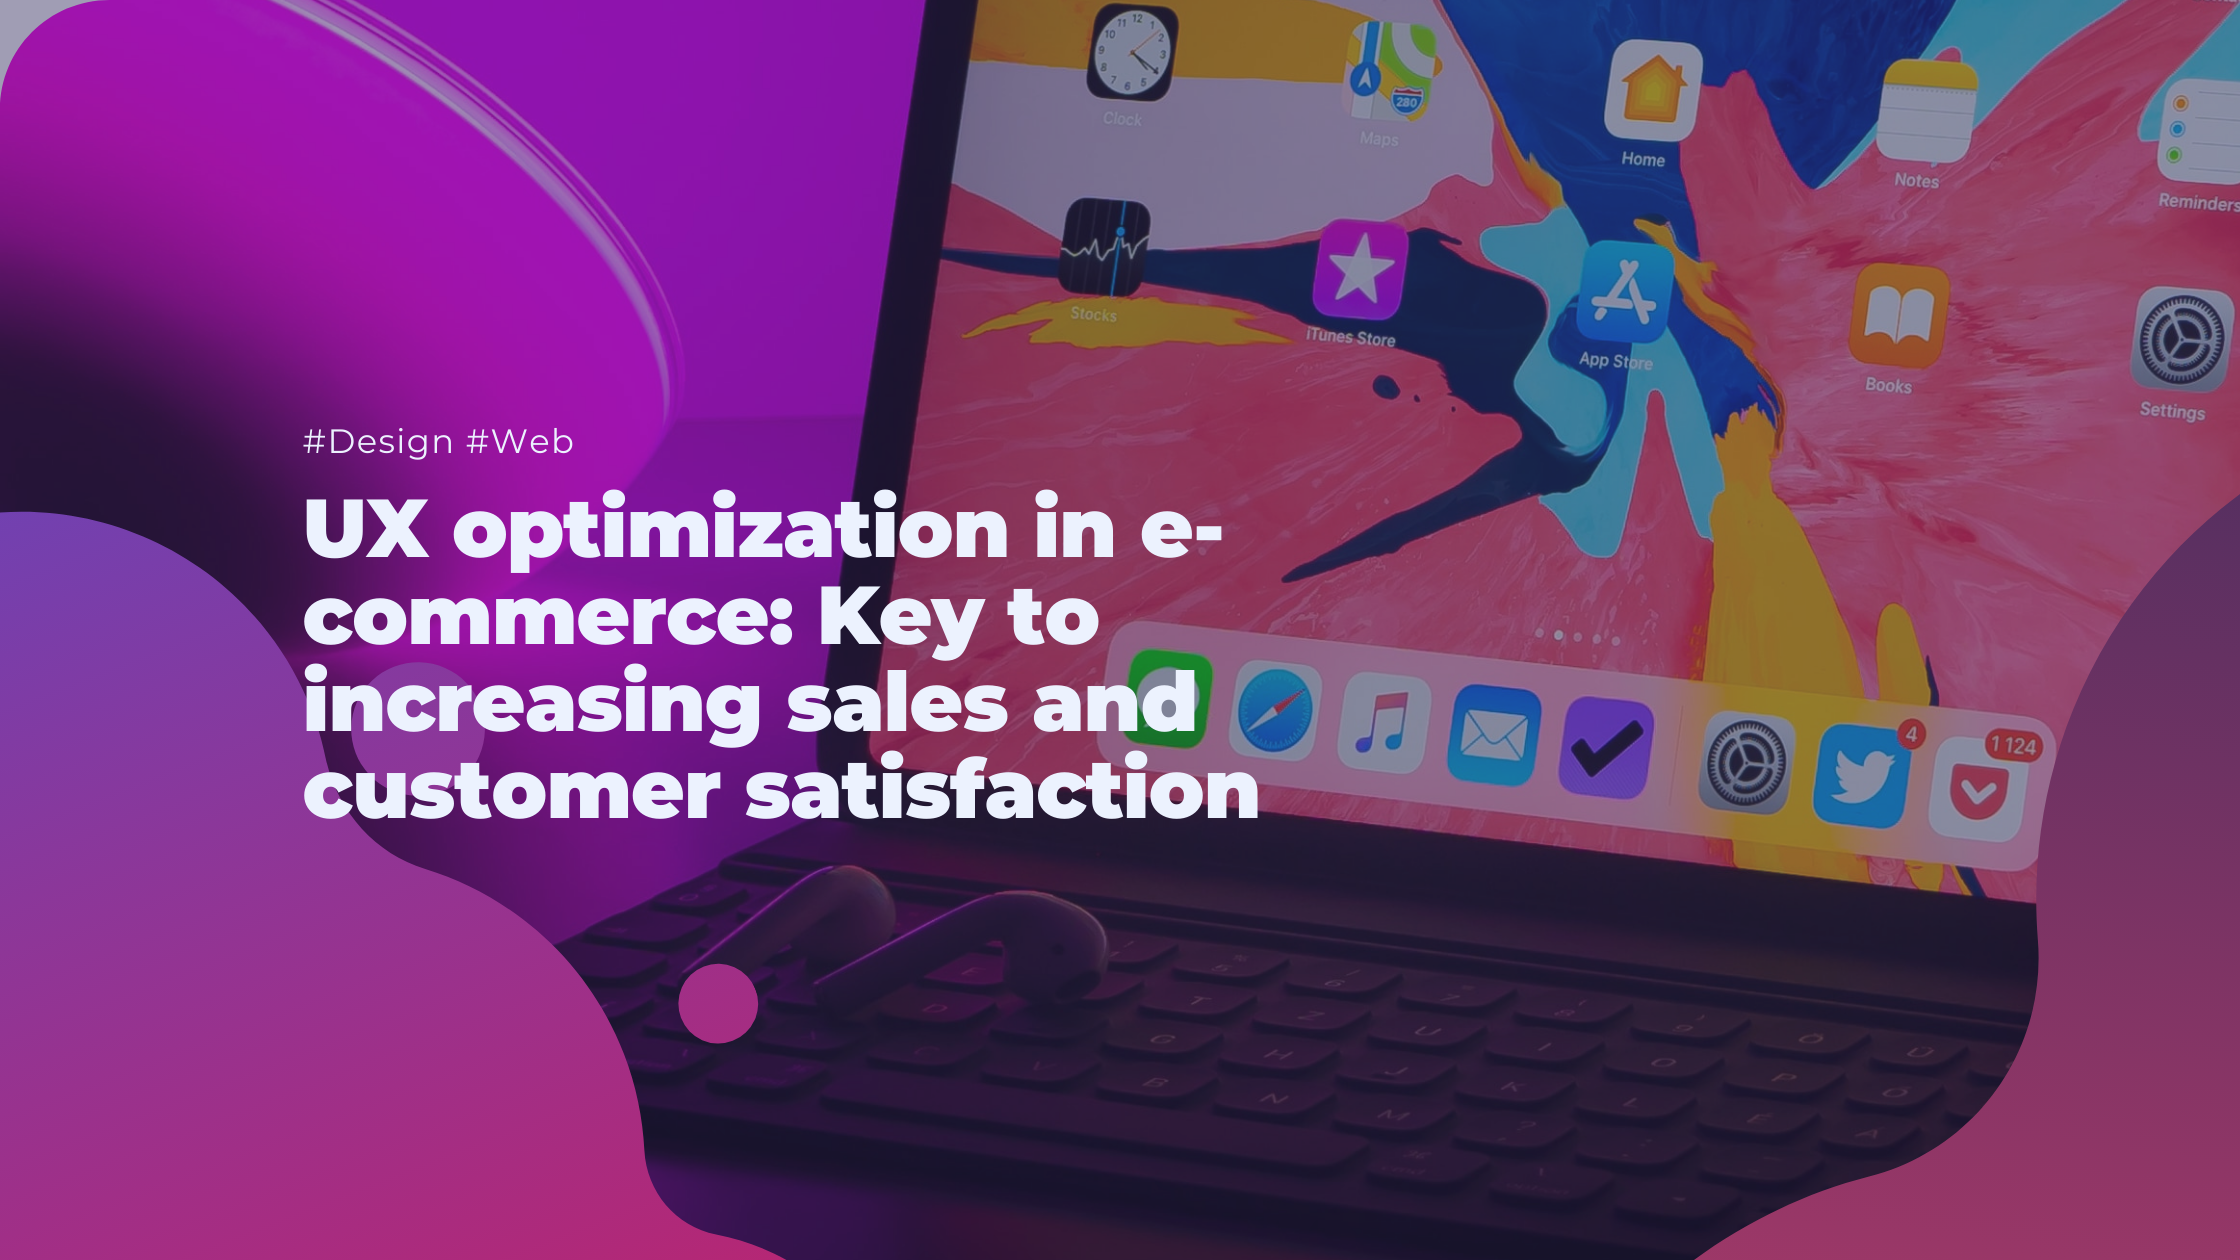 UX optimization in e-commerce: Key to increasing sales and customer satisfaction